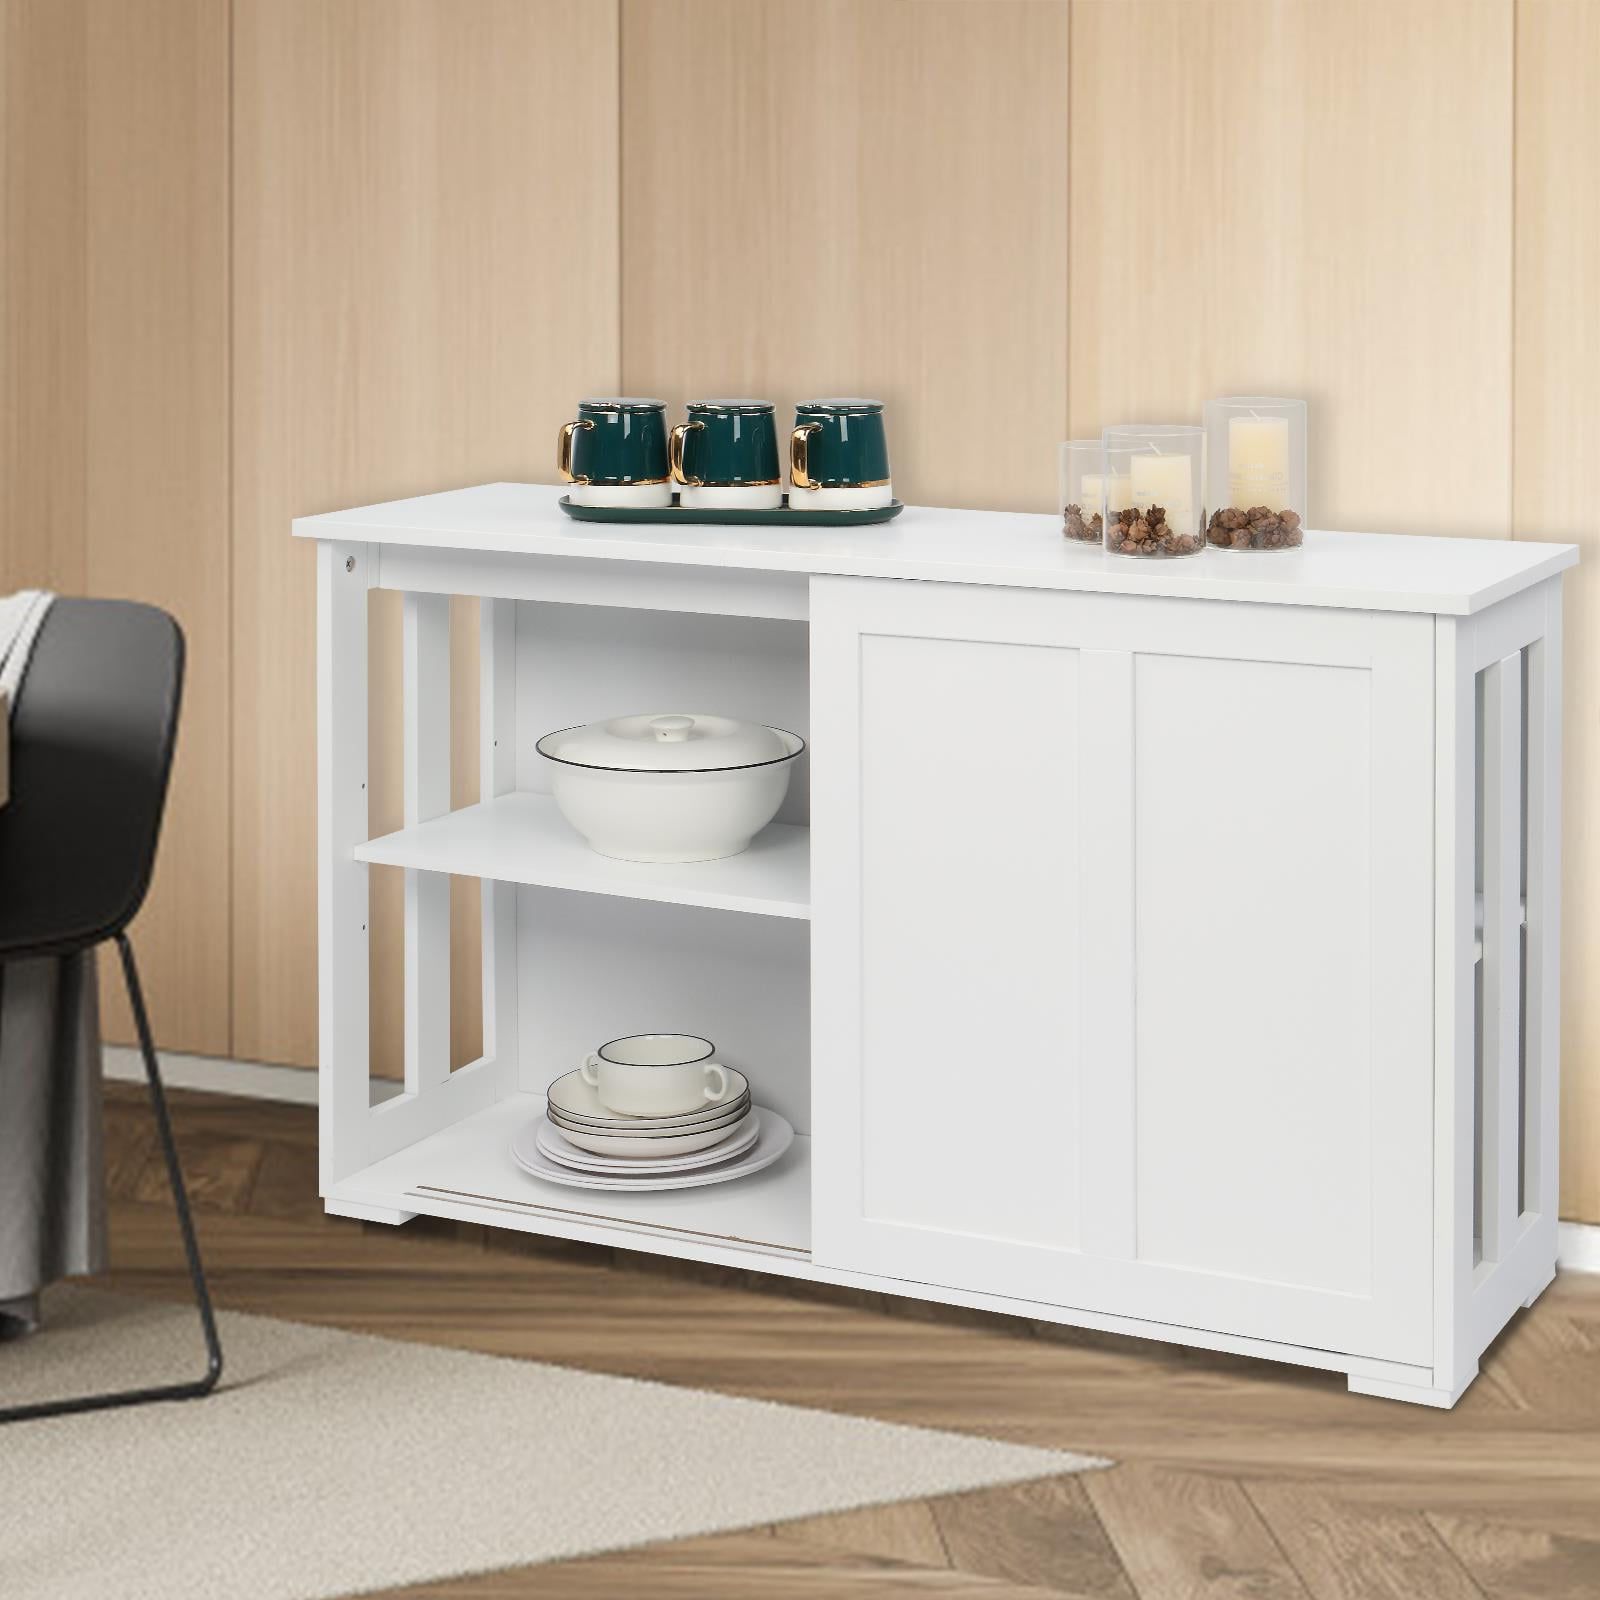 Zimtown Wood 42 Inch Sideboard Buffet Storage Cabinet Console Sofa Table  With Sliding Doors White – Walmart In Sideboards Double Barn Door Buffet (View 8 of 20)